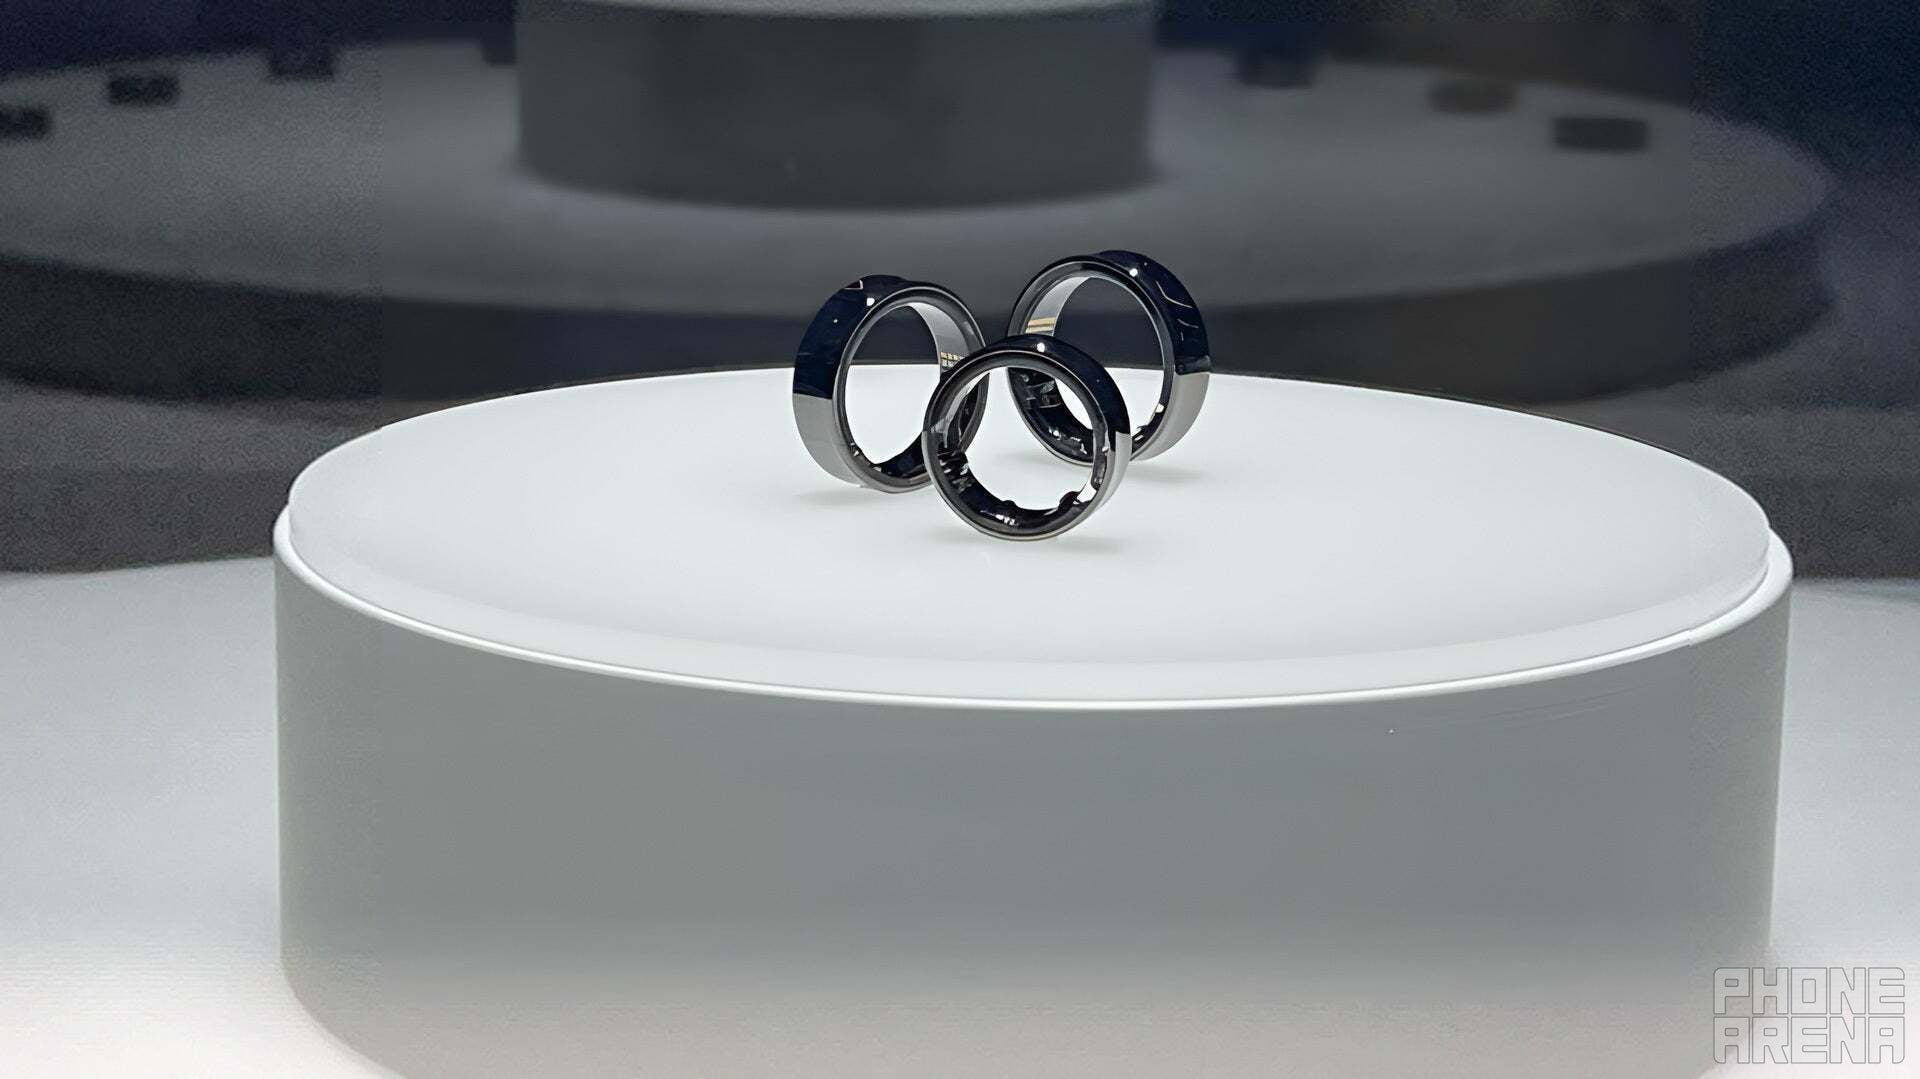 The Galaxy Ring at MWC in Barcelona (Image credit – PhoneArena) - The Galaxy Ring: the new must-have gadget or another gadget from the ecosystem?